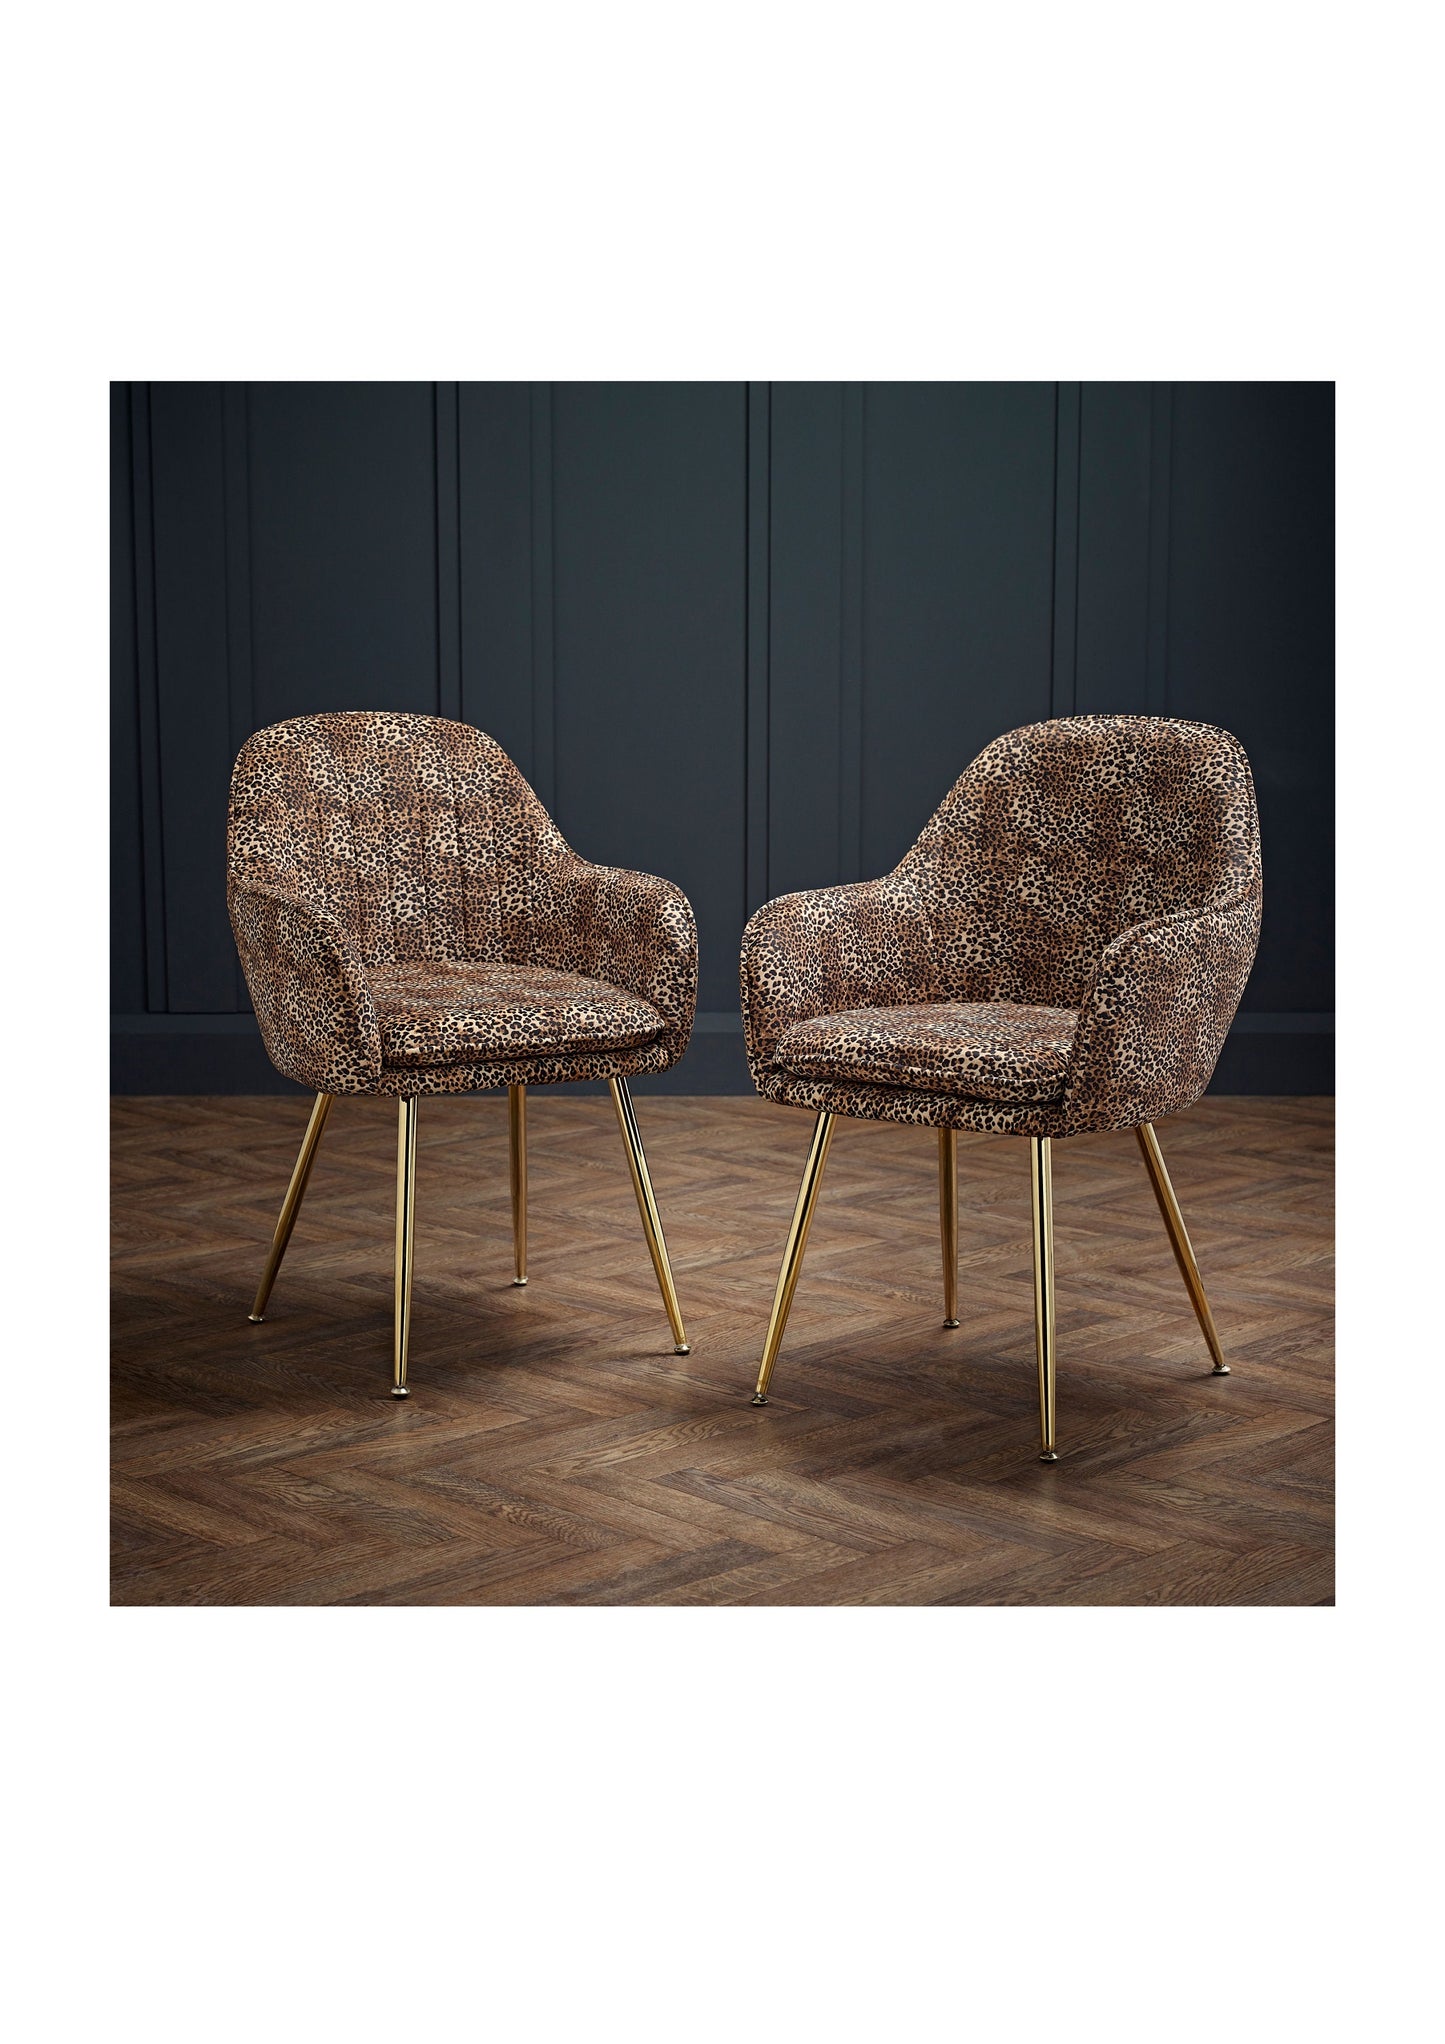 NEW Luxury Stylish Leopard Print Dining Office Desk Velvet Chair with gold legs  - Pack of 2